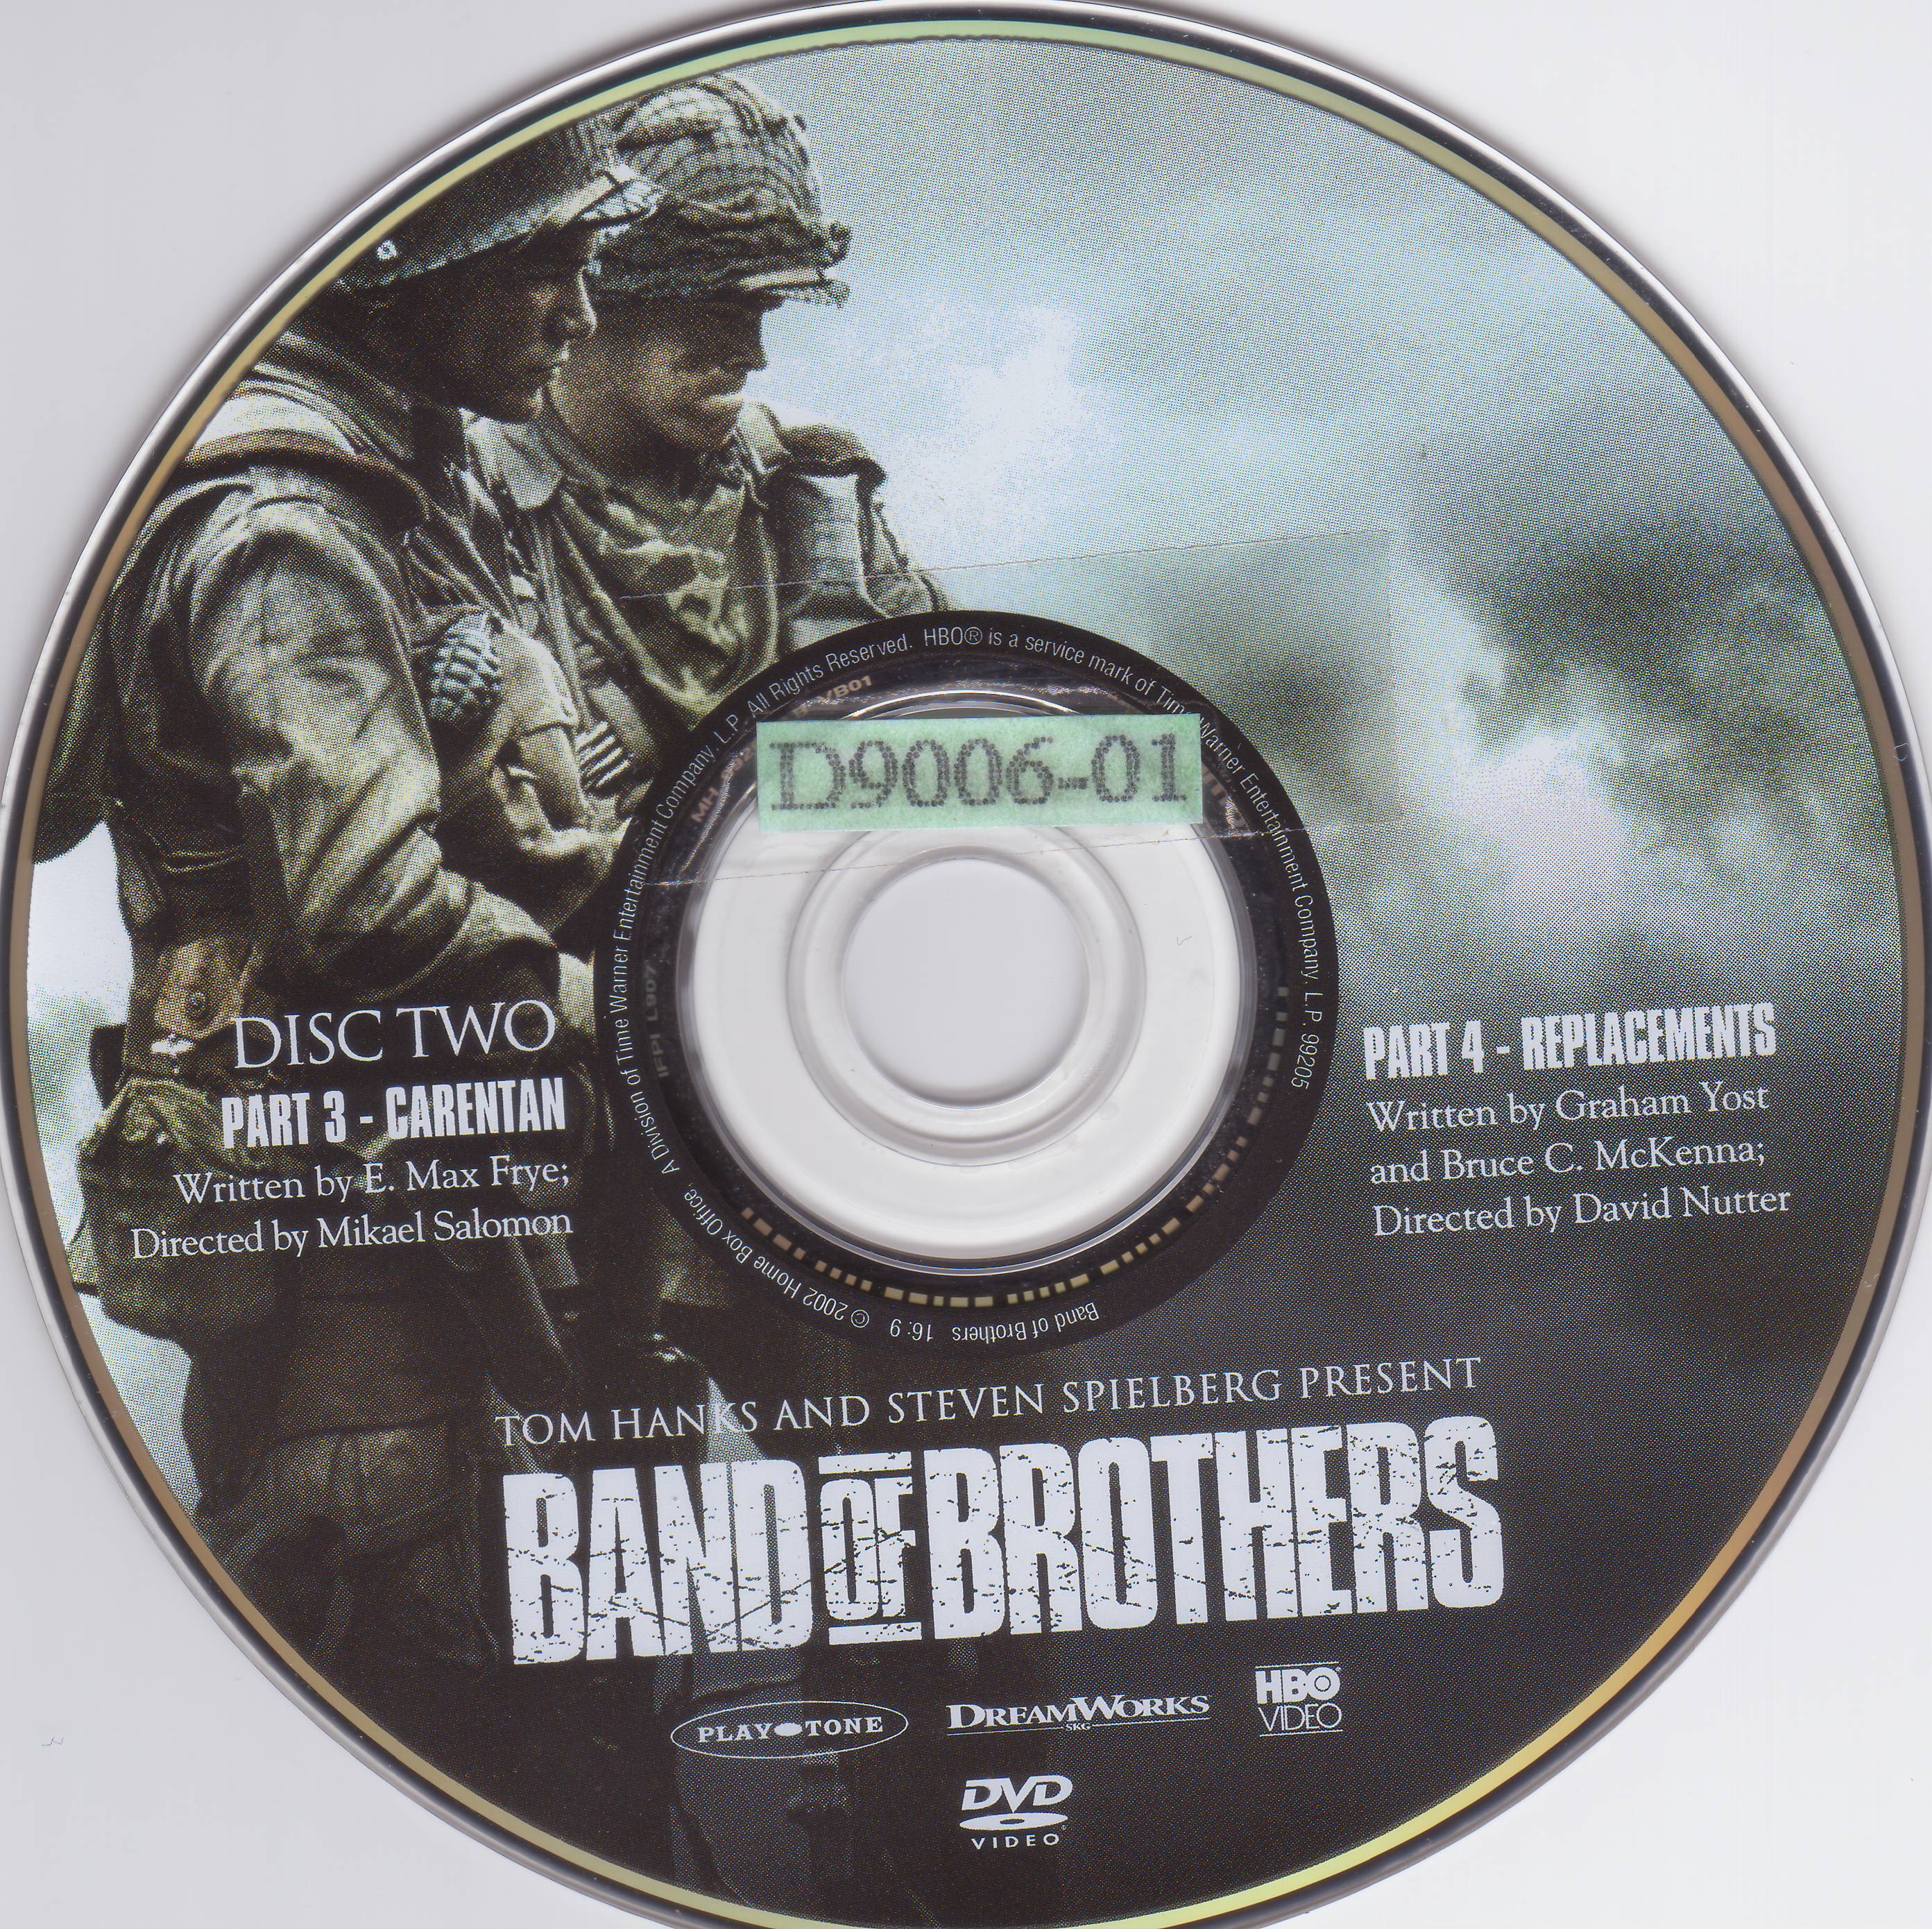 Band of brothers vol 2